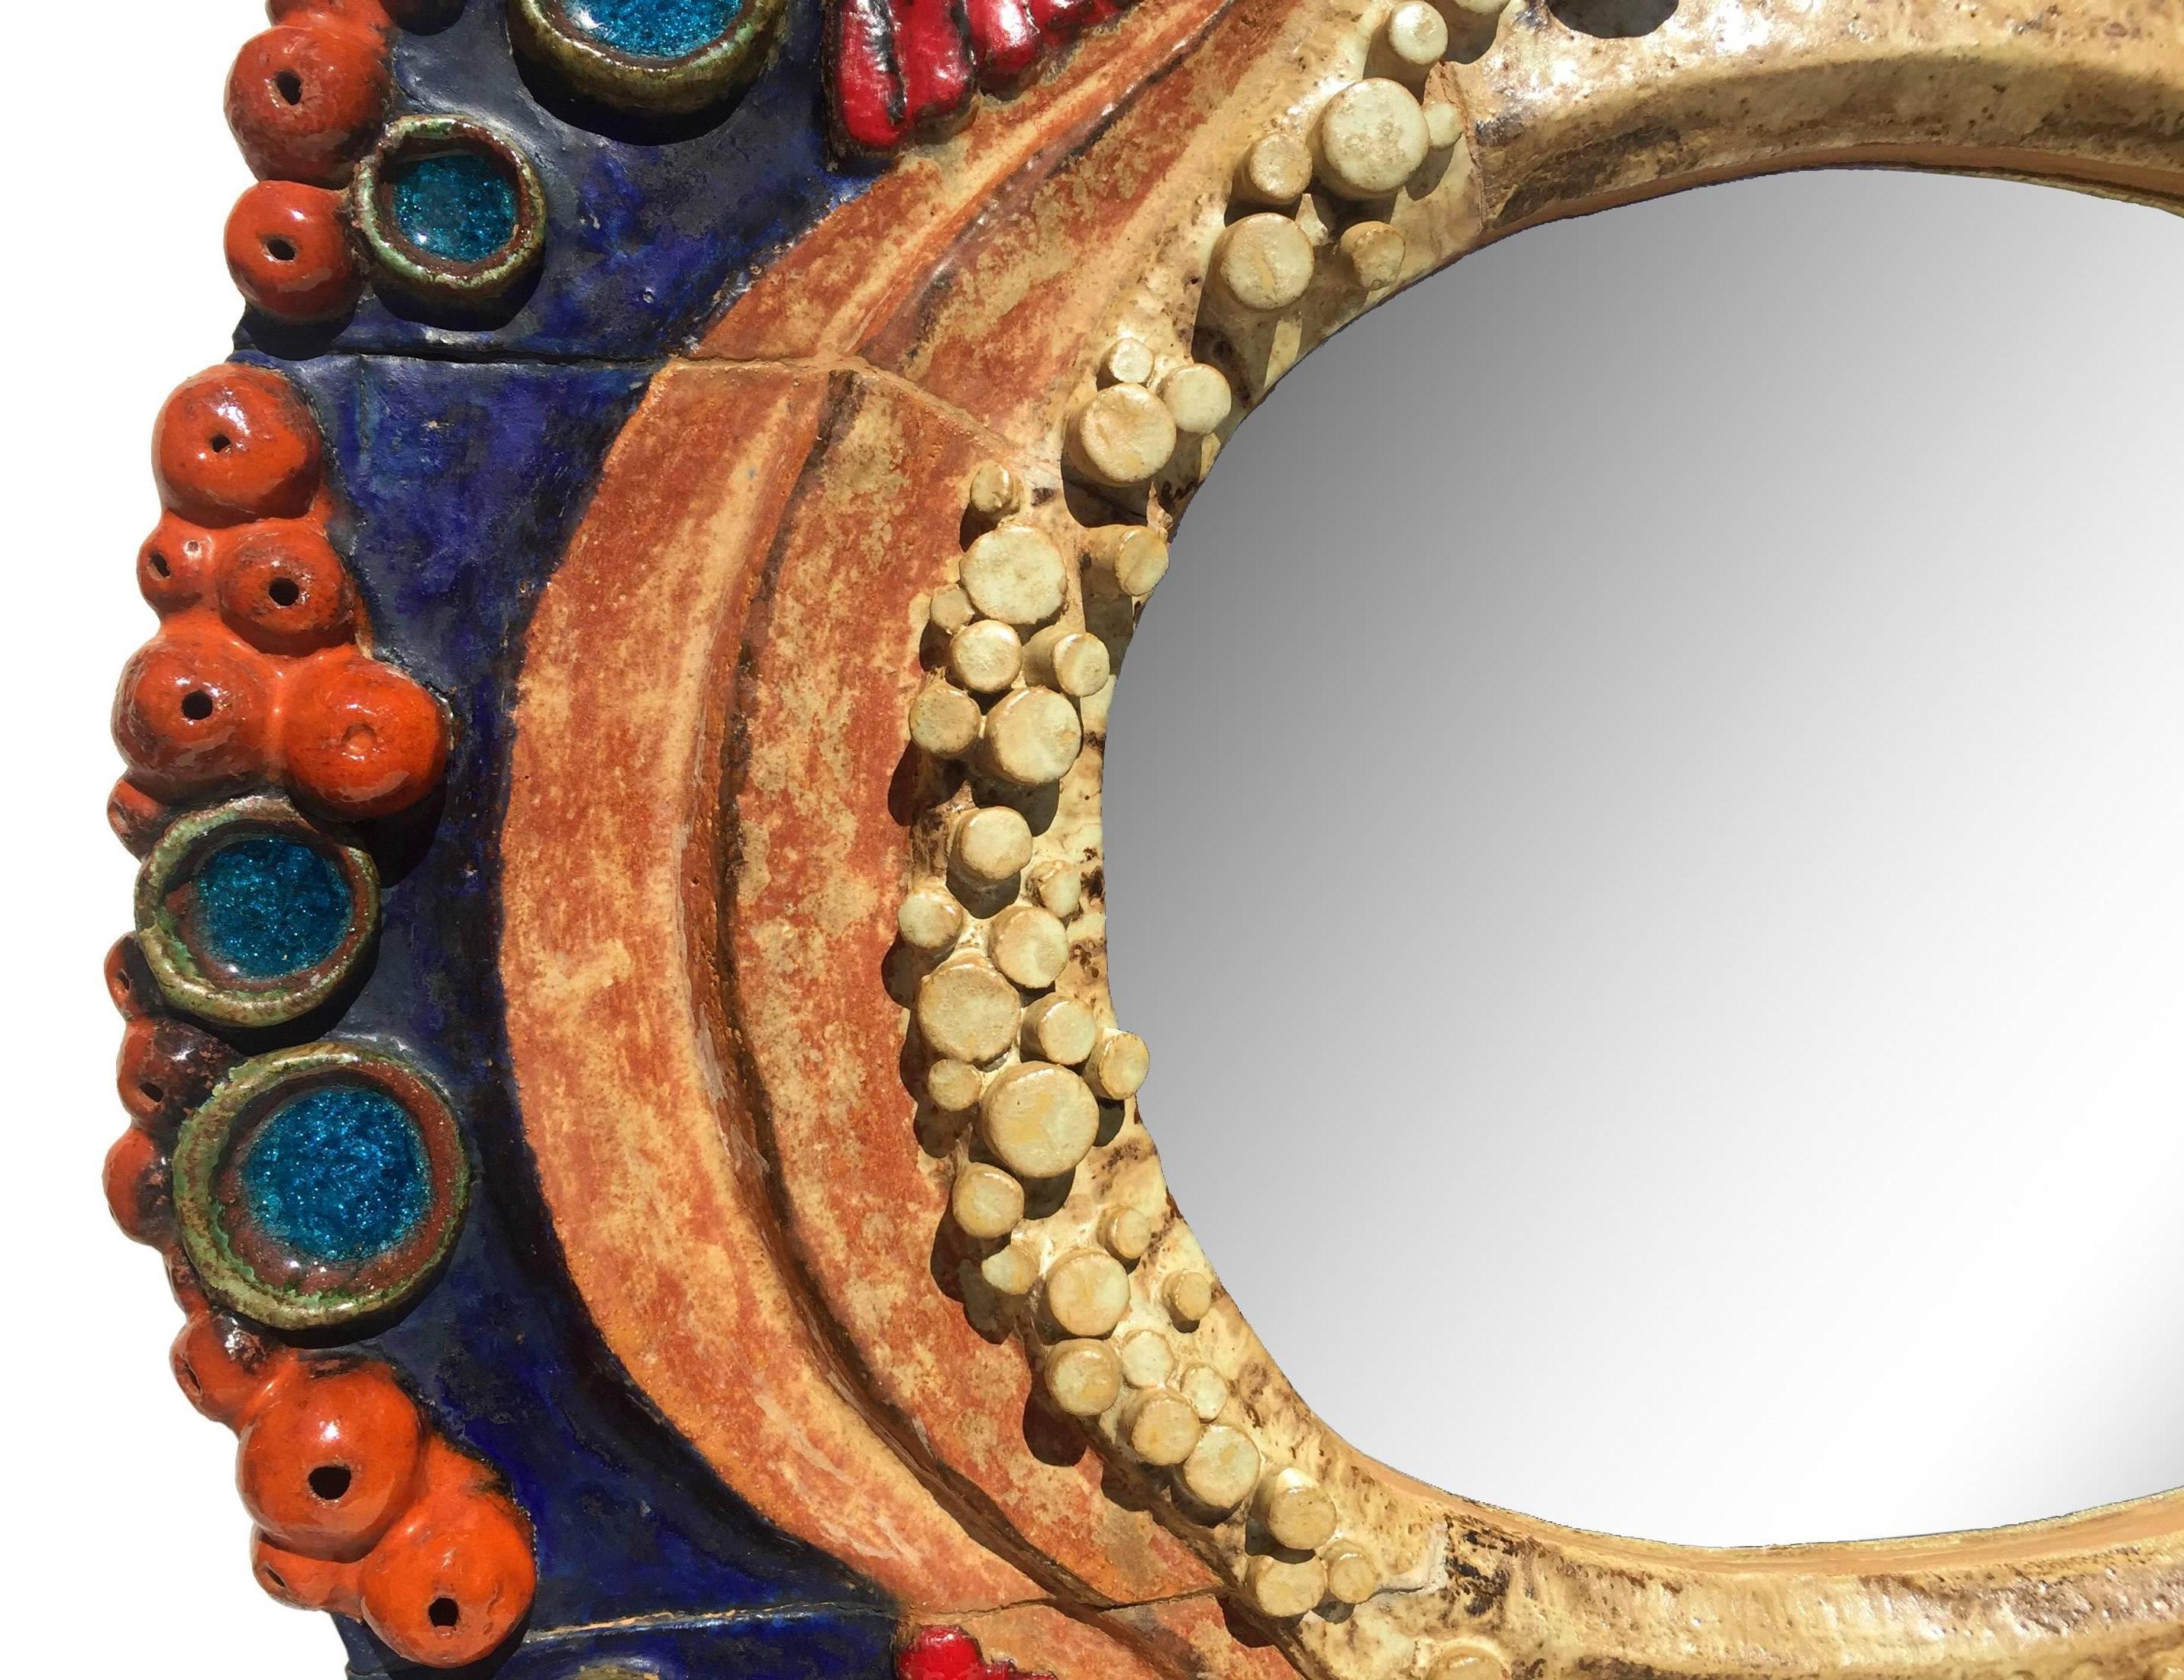 Exceptional and unique sculpted one-of-a-kind art pottery mirror by Assenmacher, circa 1970. The embellished frame has a relief of mysterious gem-like cascades. The colorful rainbow presentation reminiscences to medieval Gothic cathedrals, to